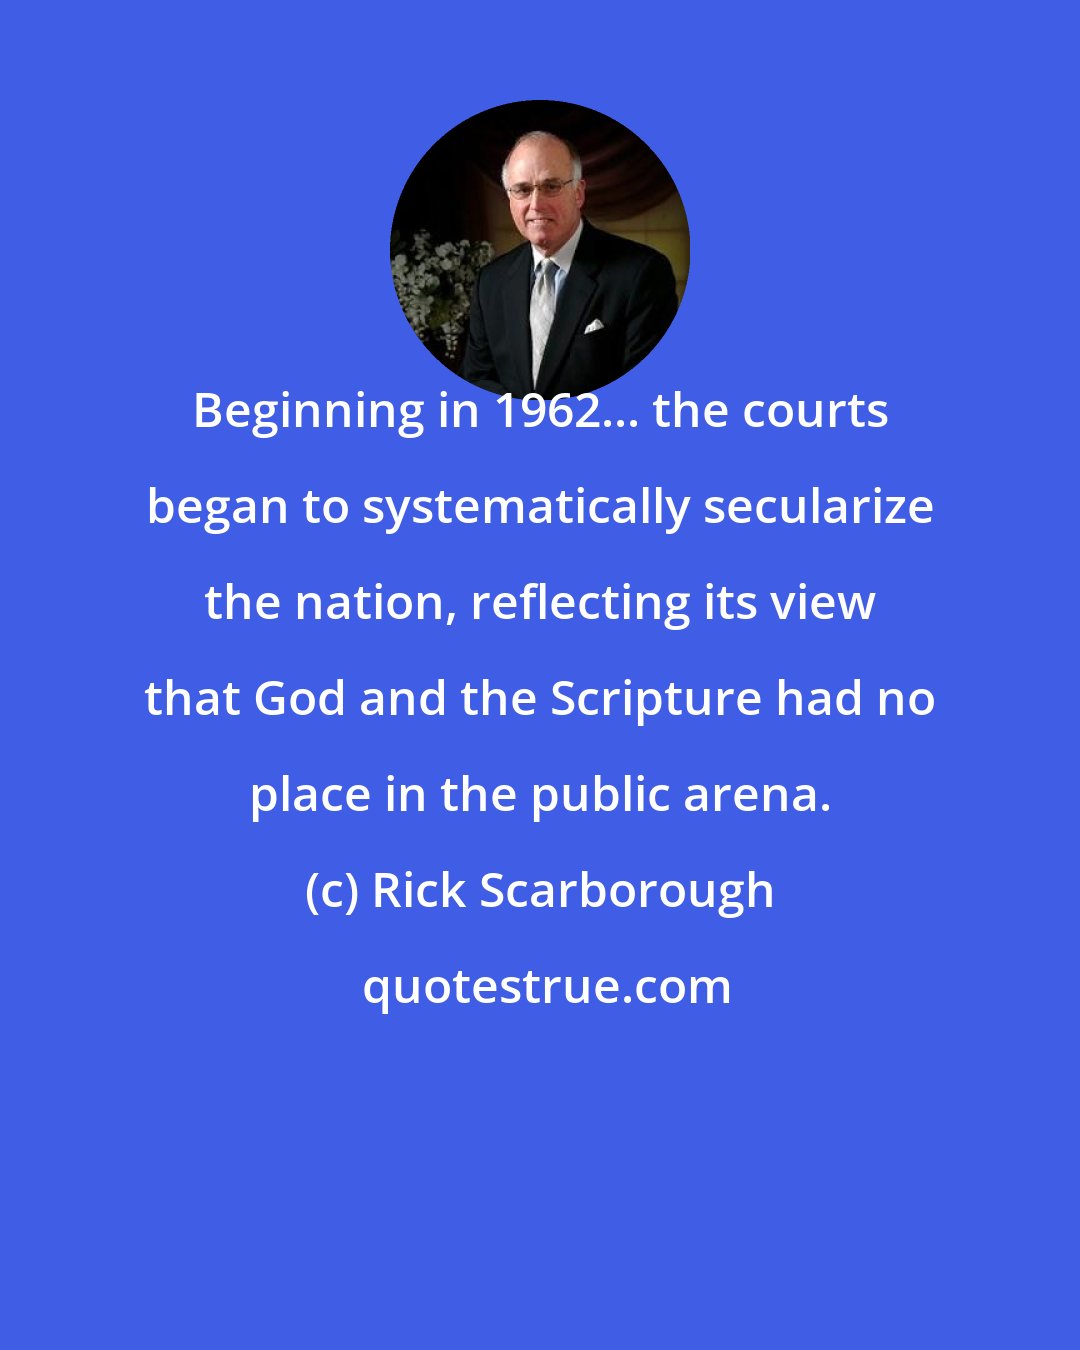 Rick Scarborough: Beginning in 1962... the courts began to systematically secularize the nation, reflecting its view that God and the Scripture had no place in the public arena.